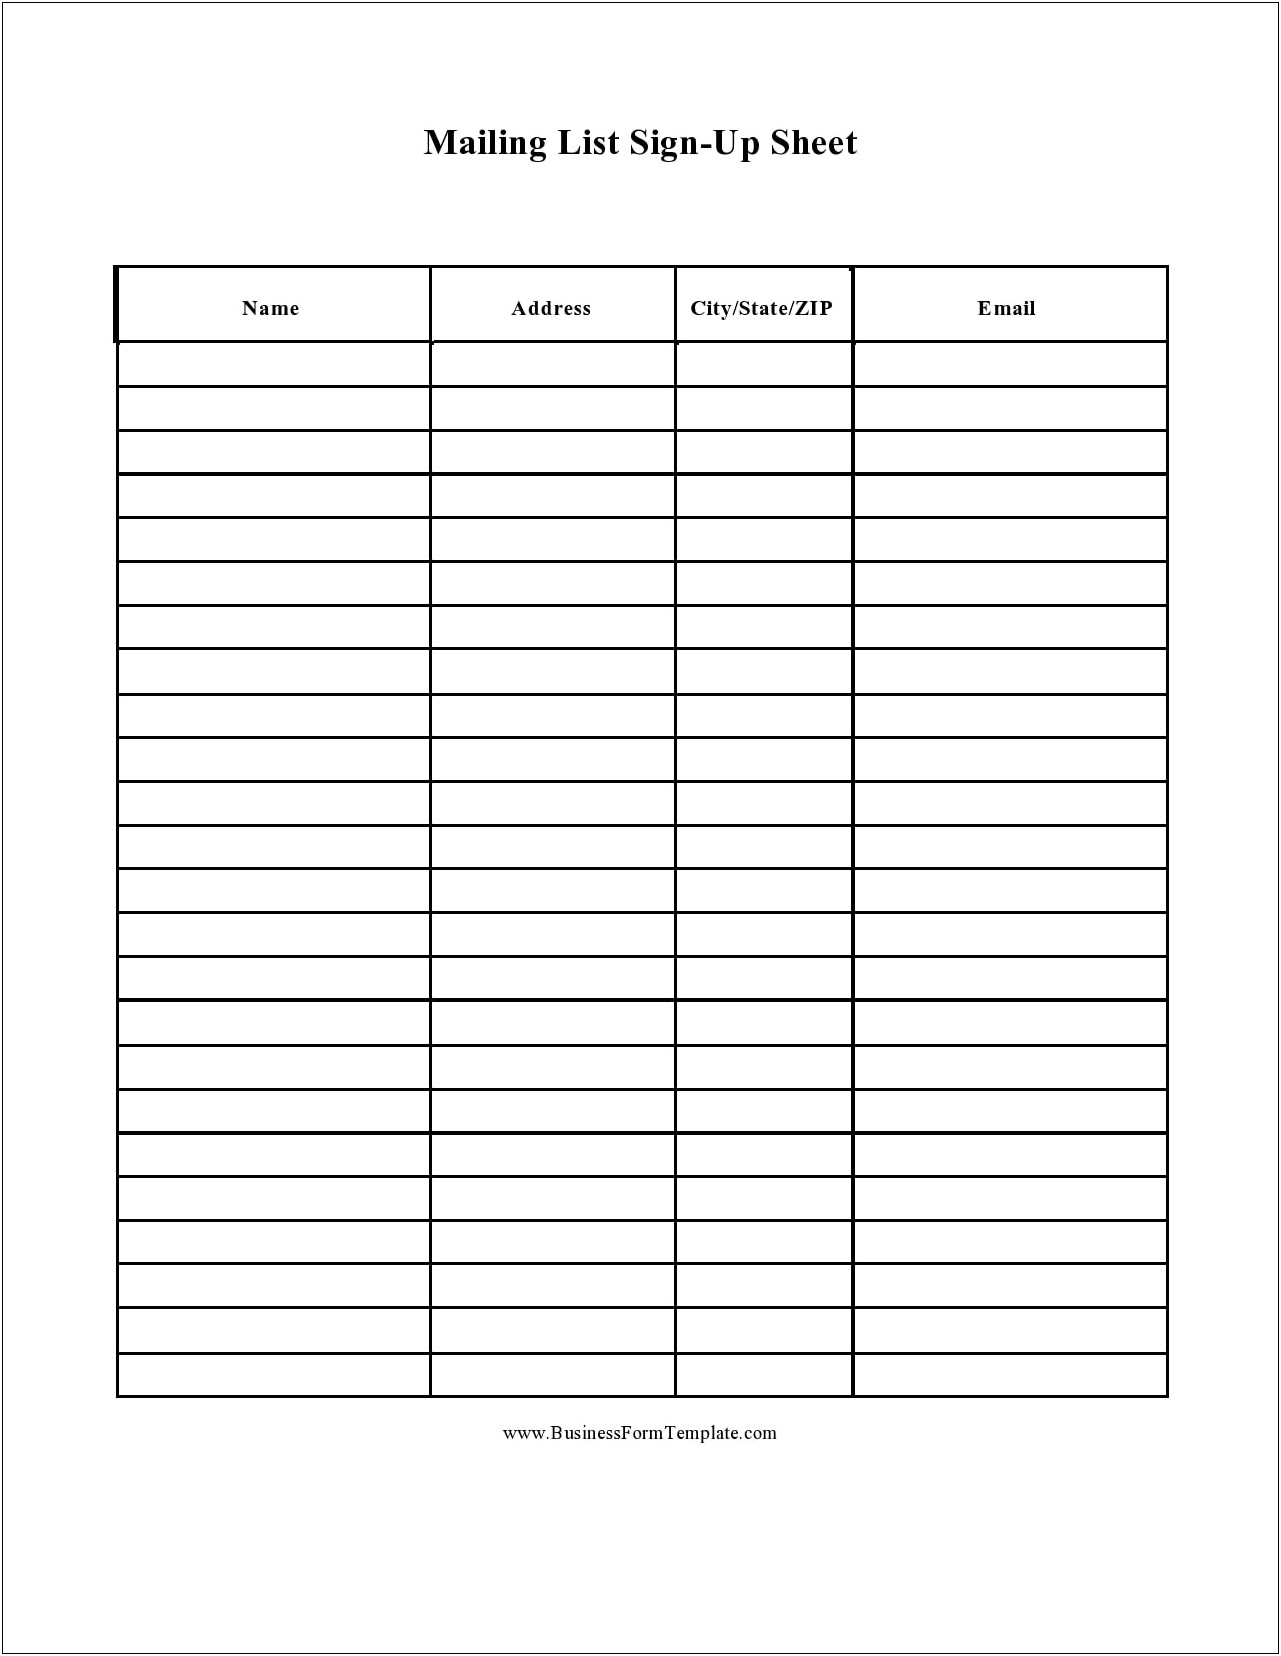 Sign In Sheet Template Word Name Email Phone